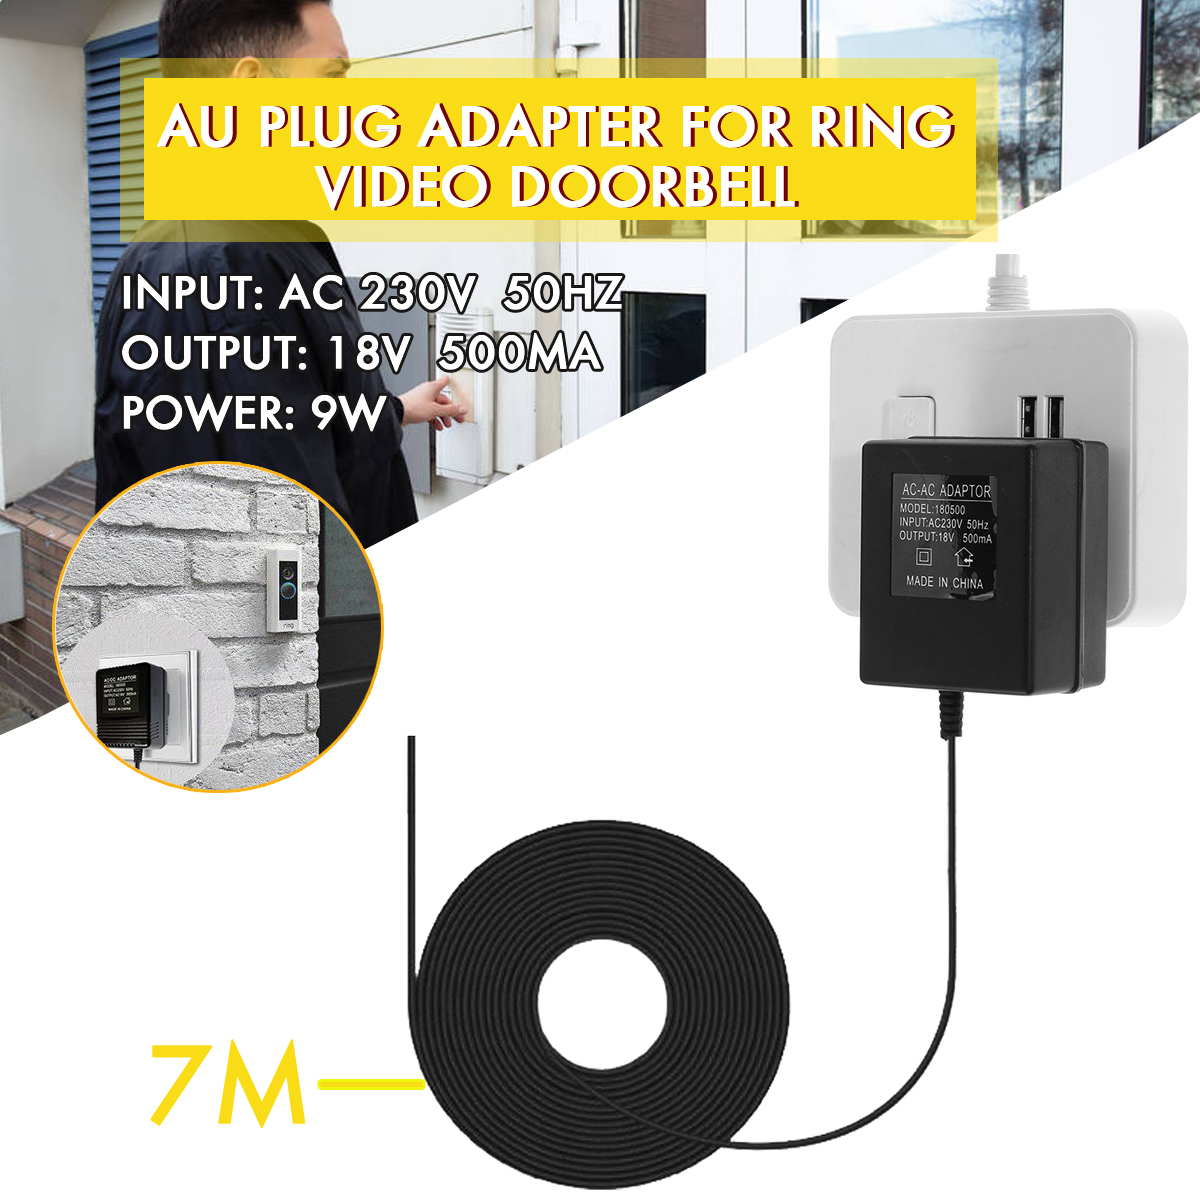 7m-Cable-AU-Plug-Adapter-for-Rring-Video-Doorbell-230V-to-18V-500ma-1587262-1